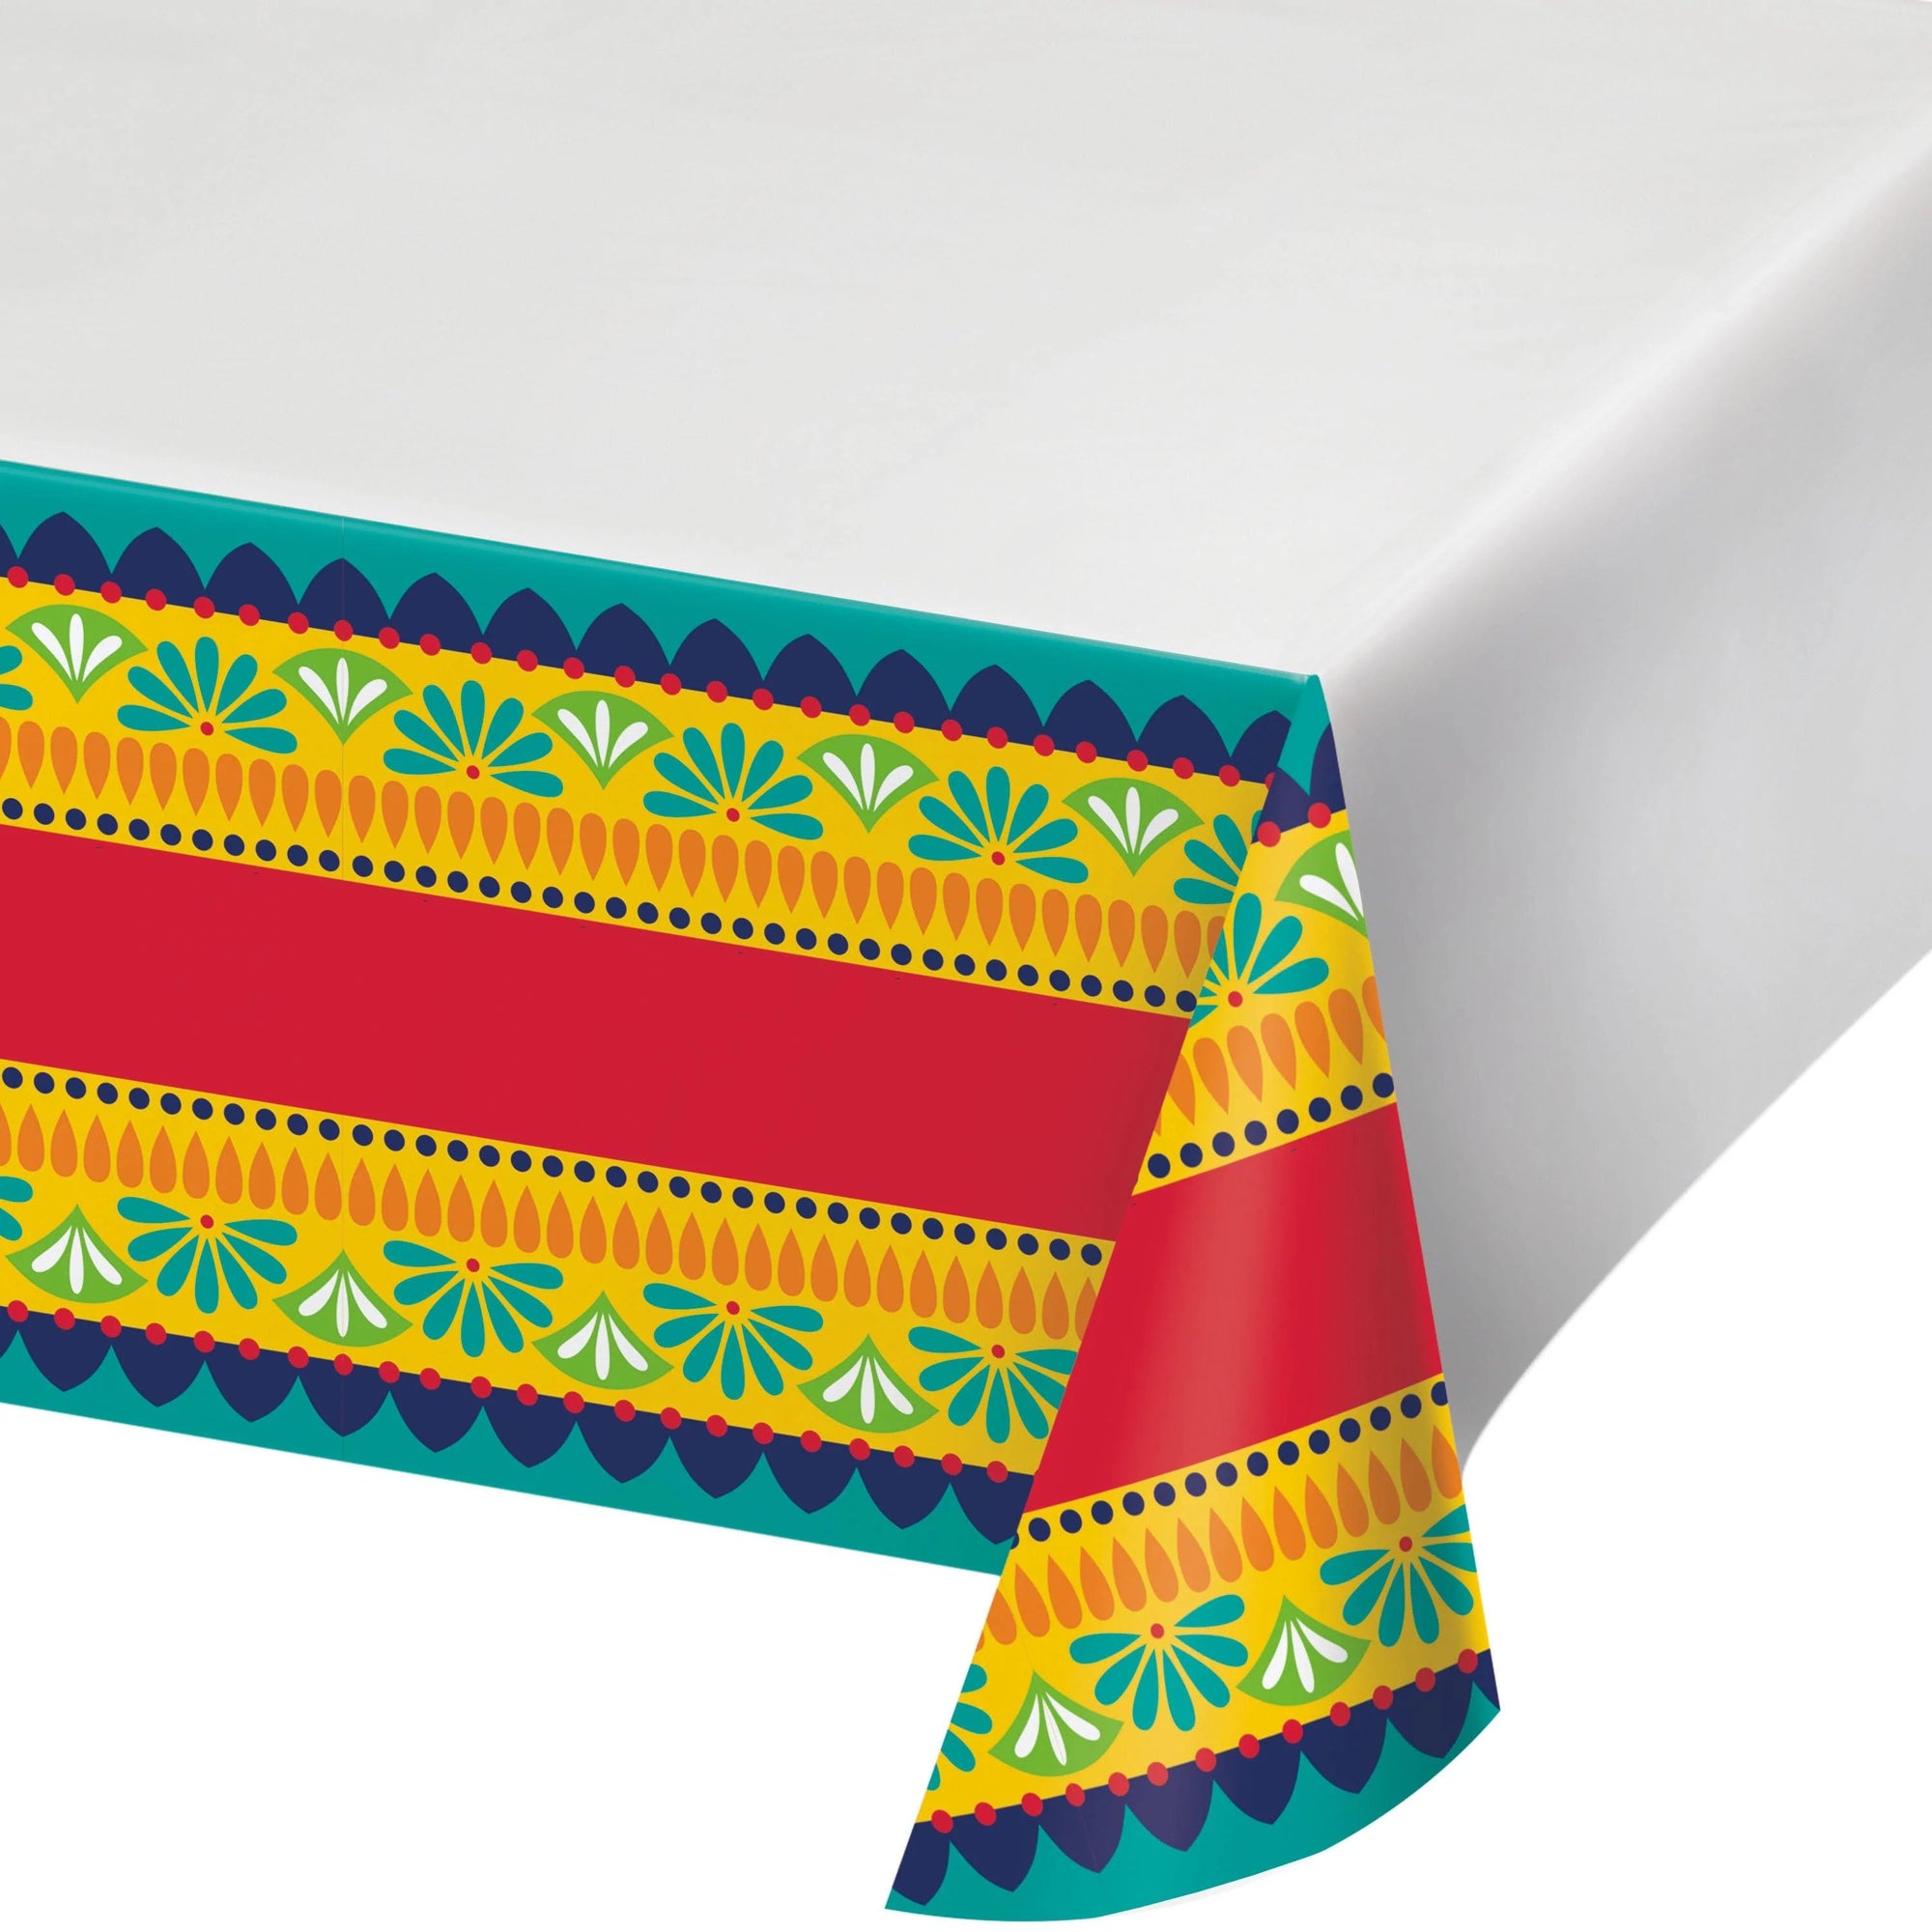 Bulk Case of Fiesta Pottery Paper Tablecover Border Print, 54" x 102" by Creative Converting